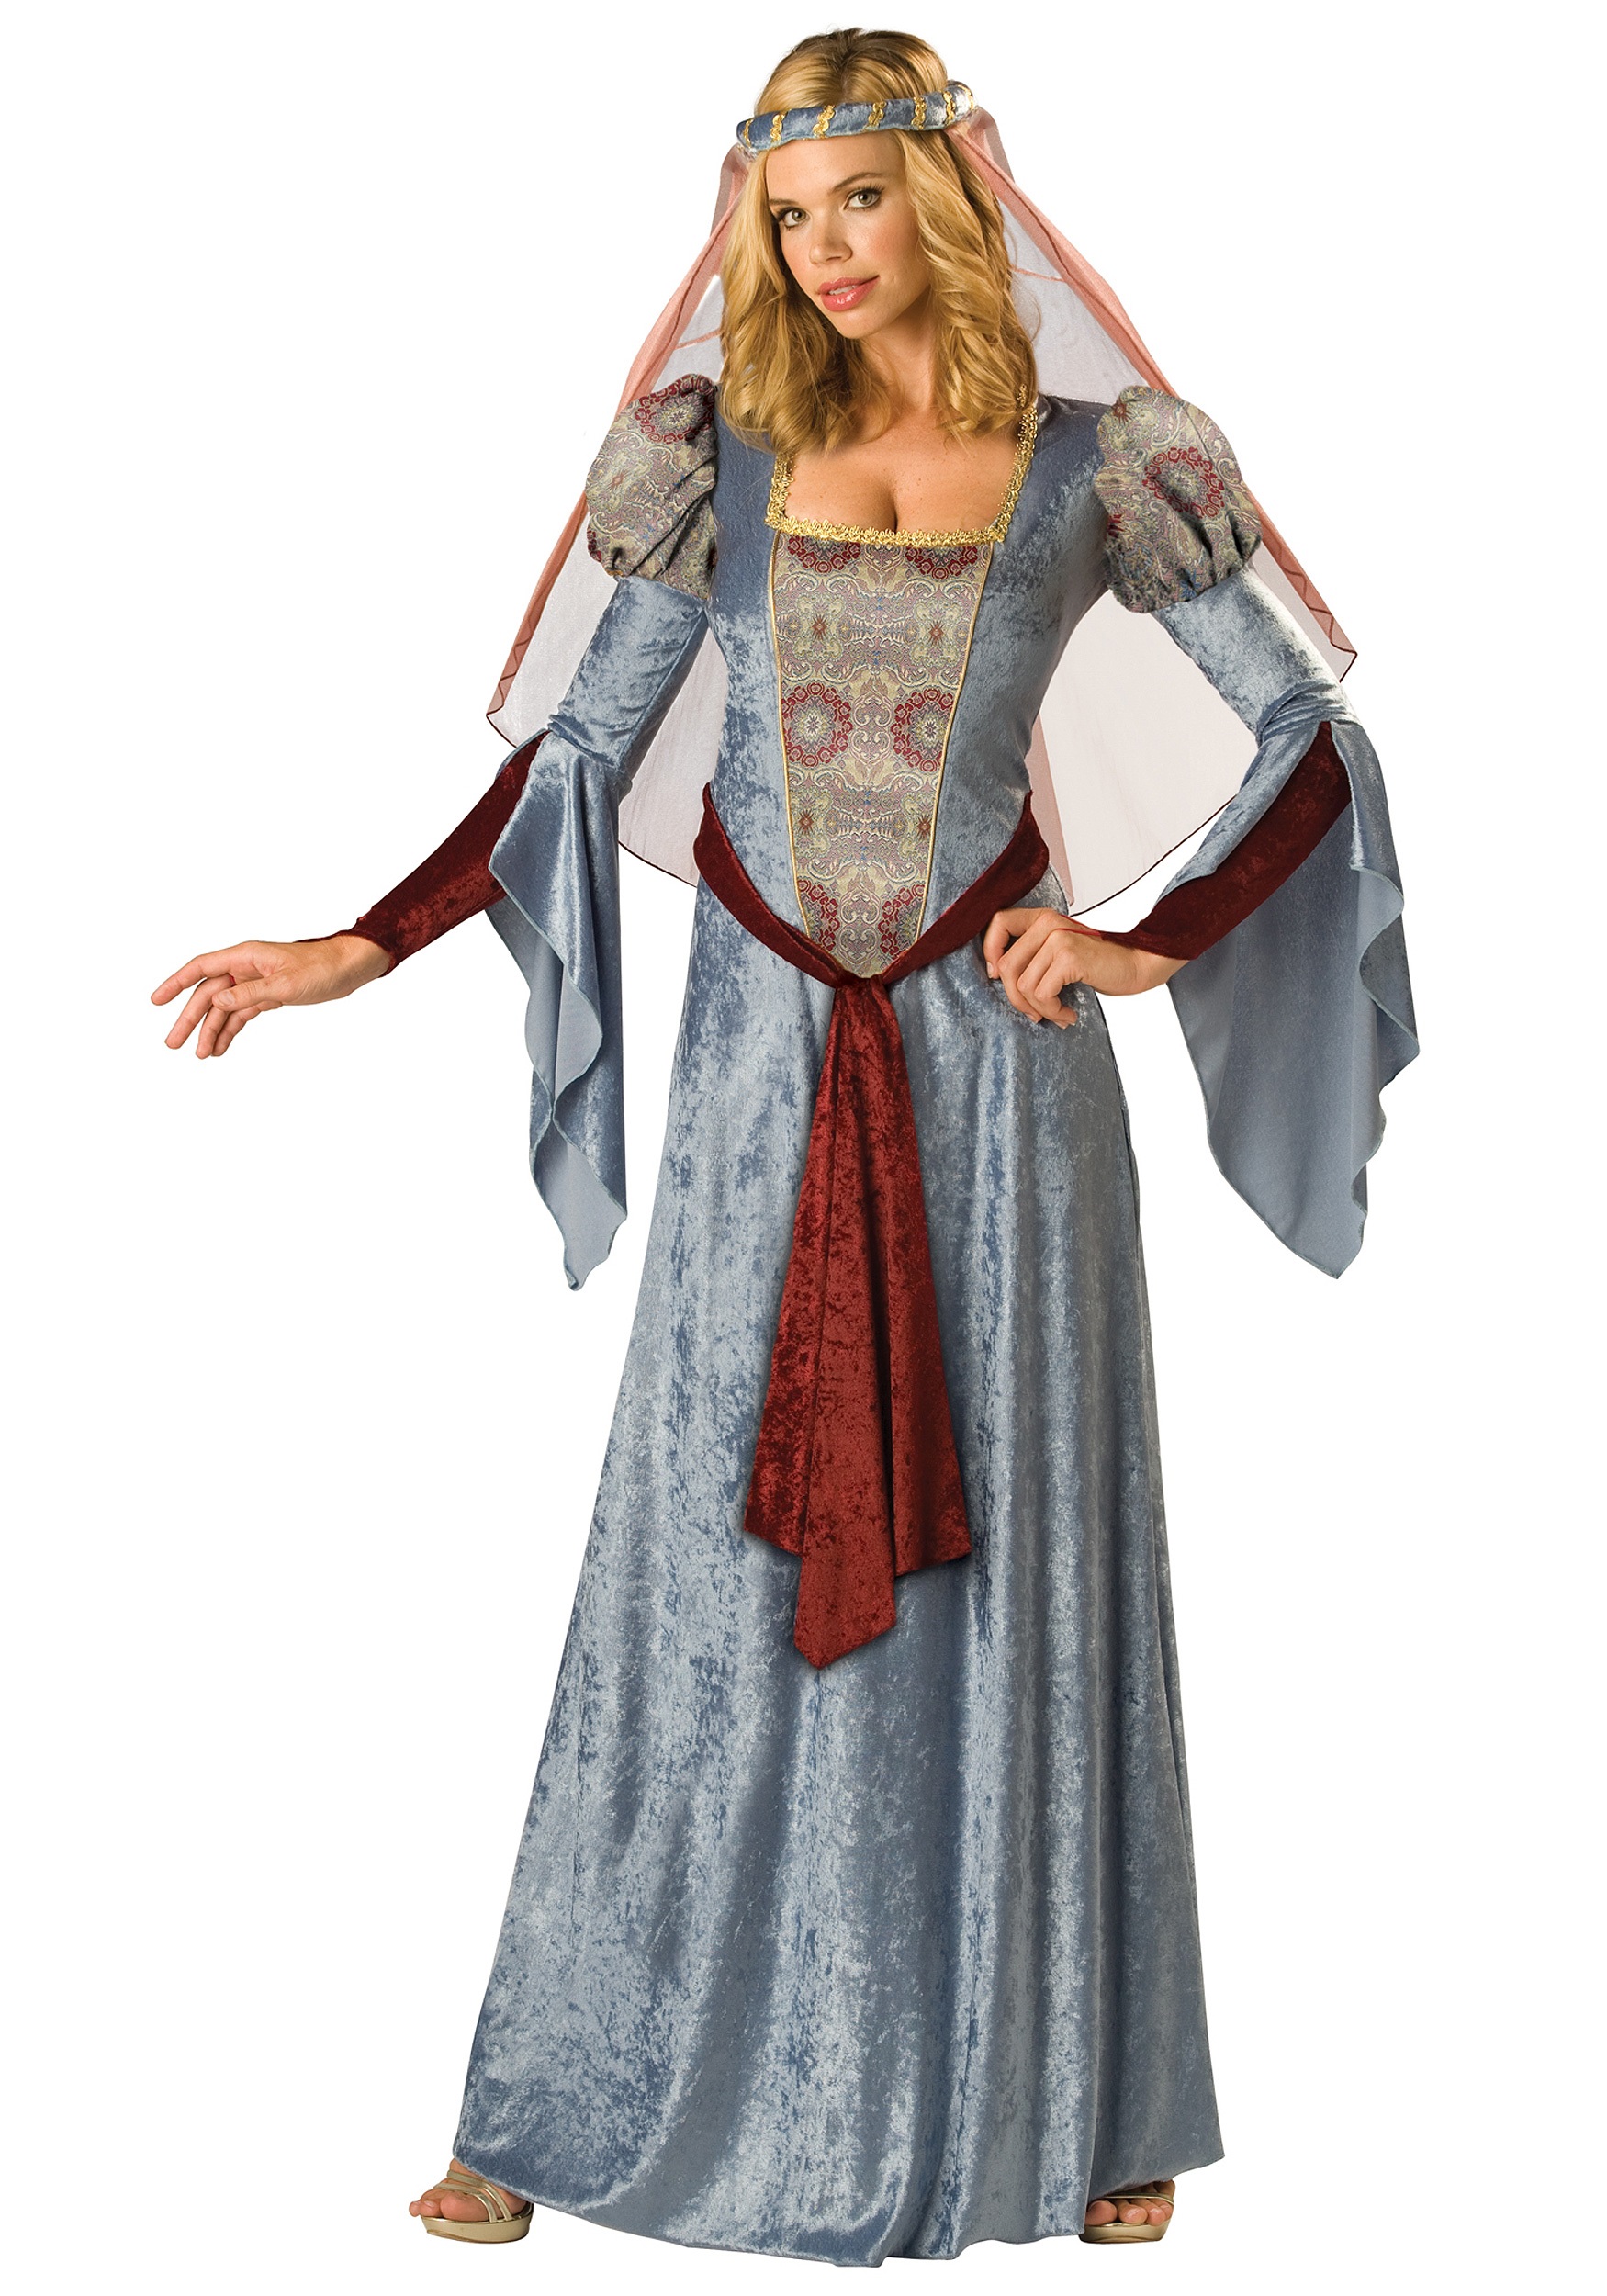 Enchanting Maid Marion Costume for Women